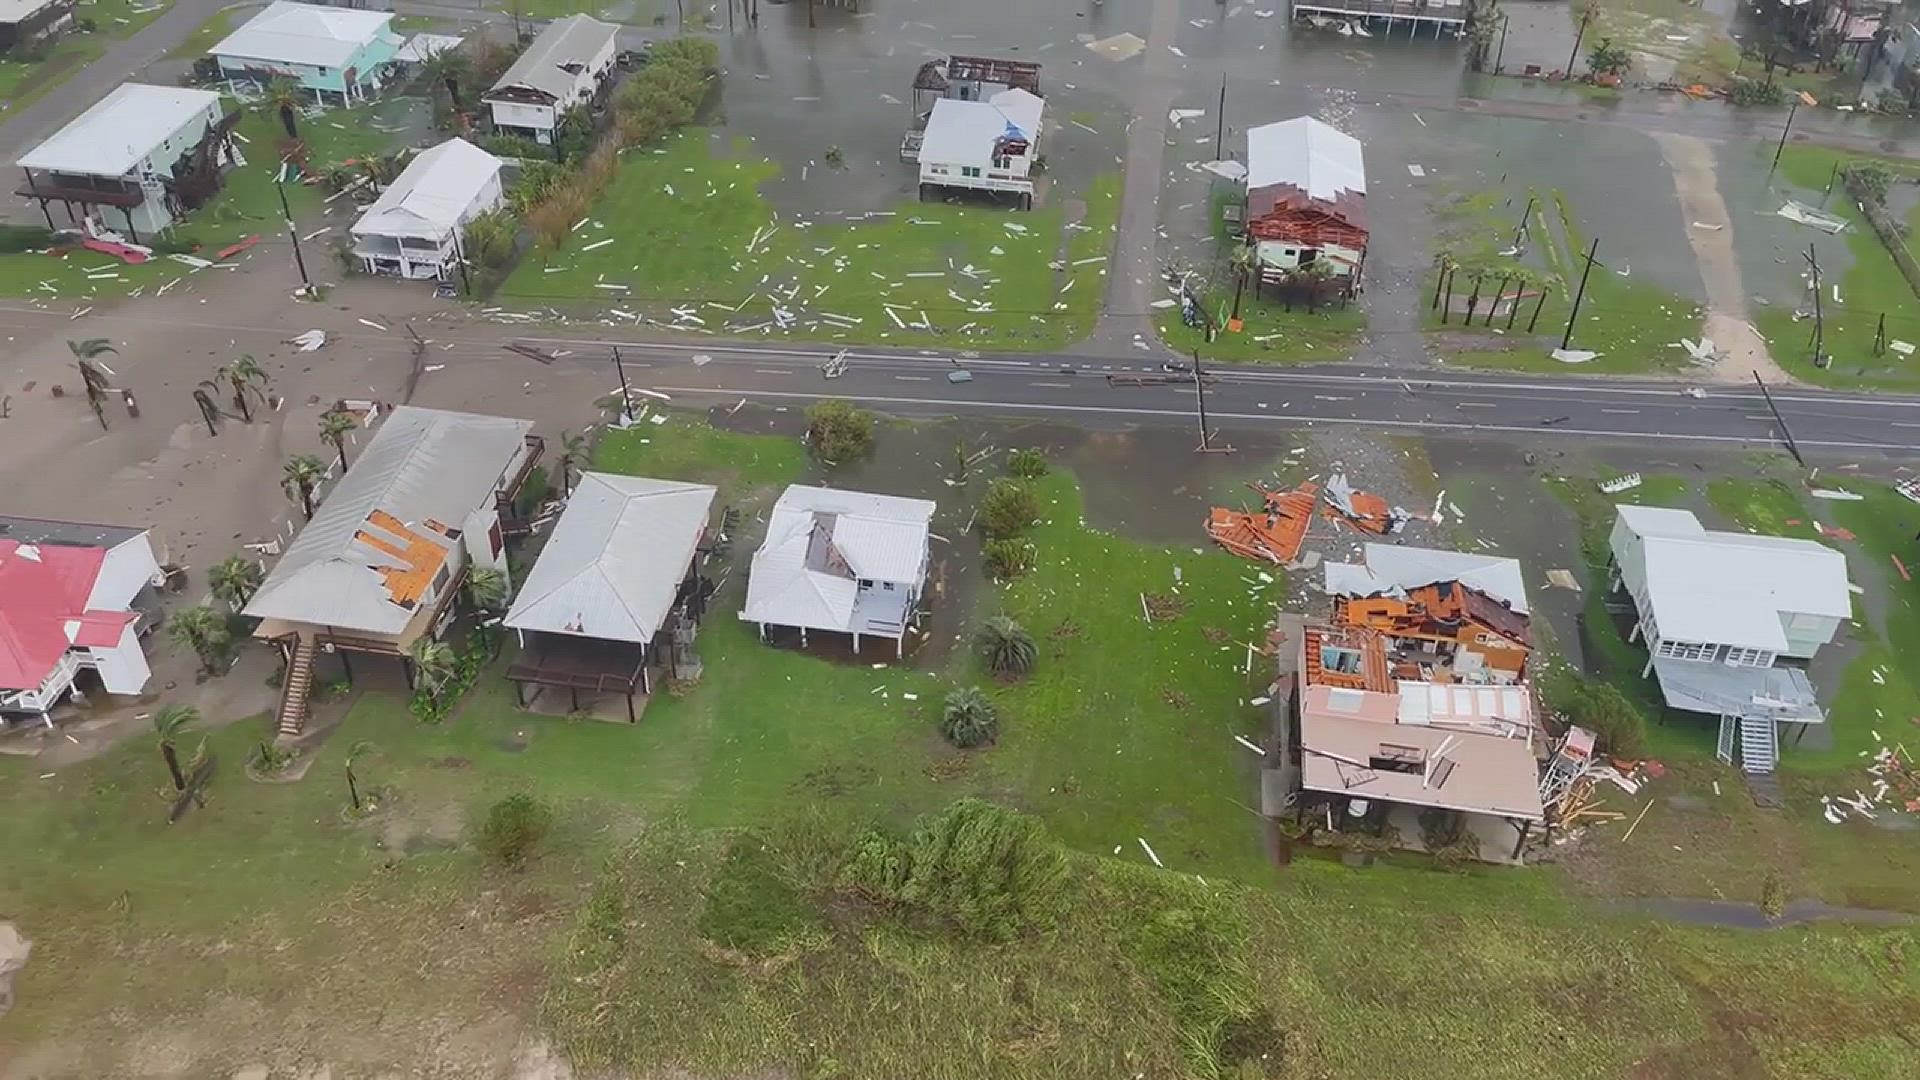 First look at Grand Isle after Hurricane Ida's destruction